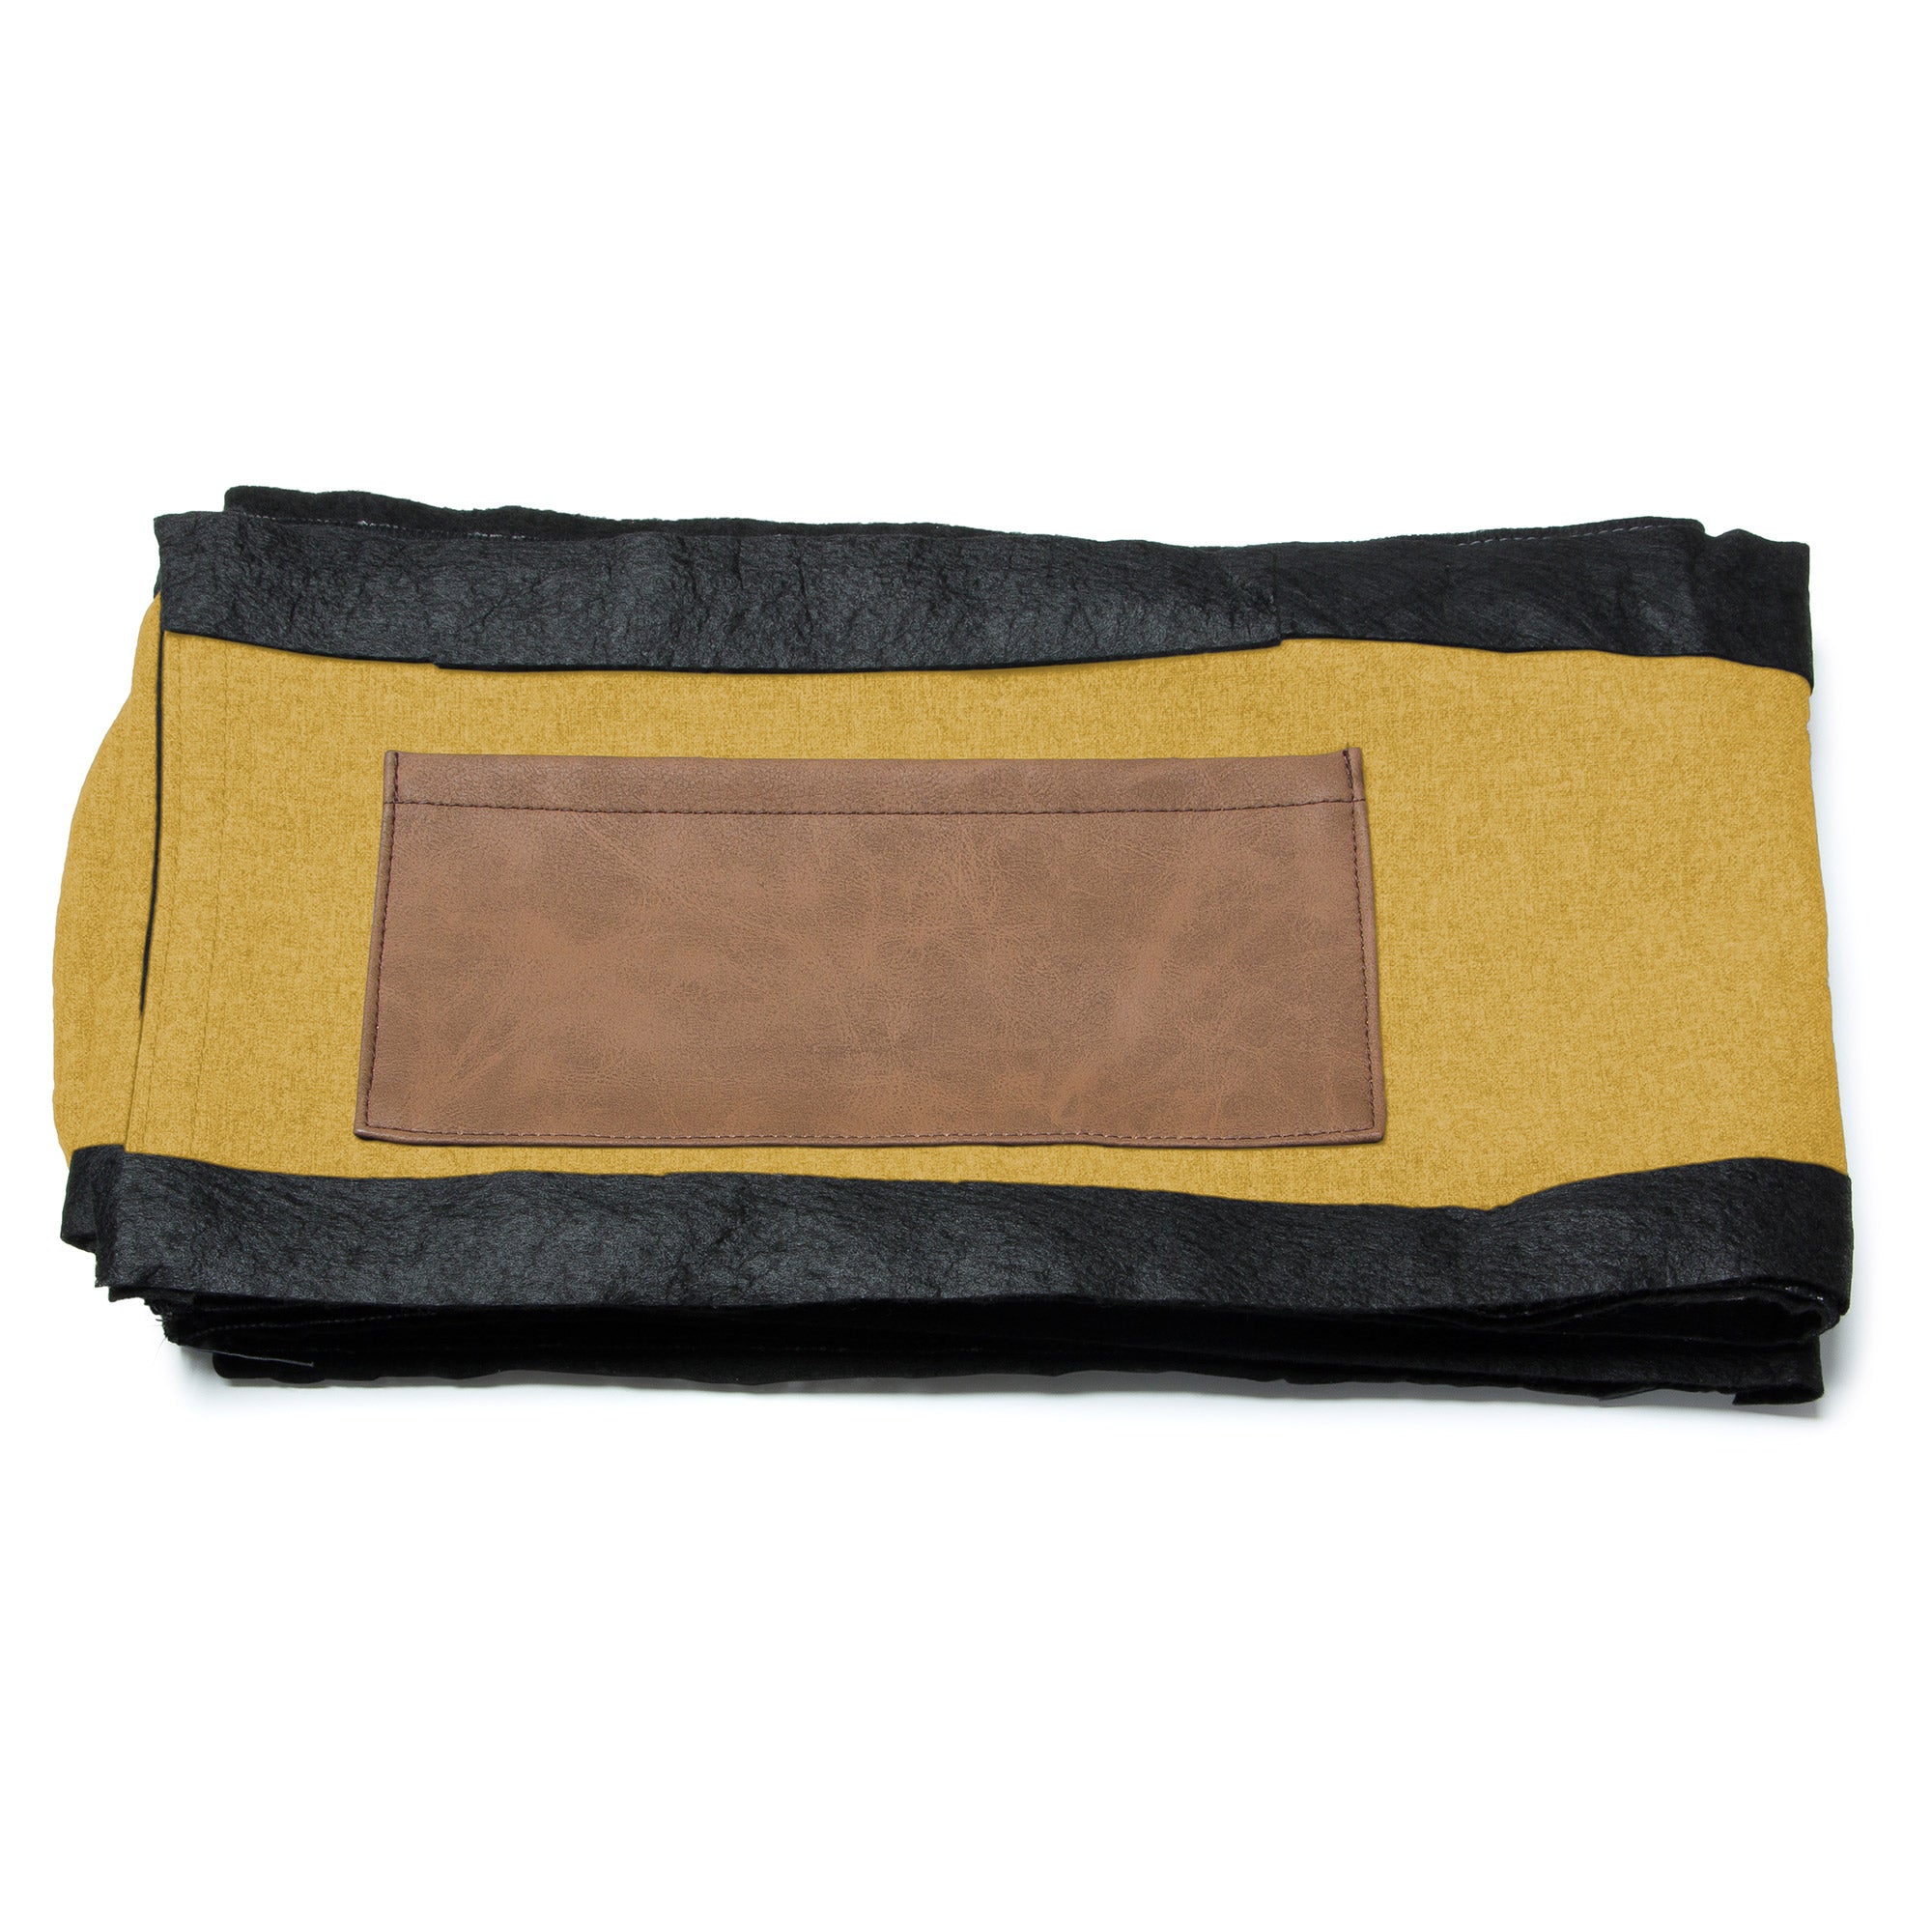 Dyla bed cover in mustard for a 160 x 200 cm mattress